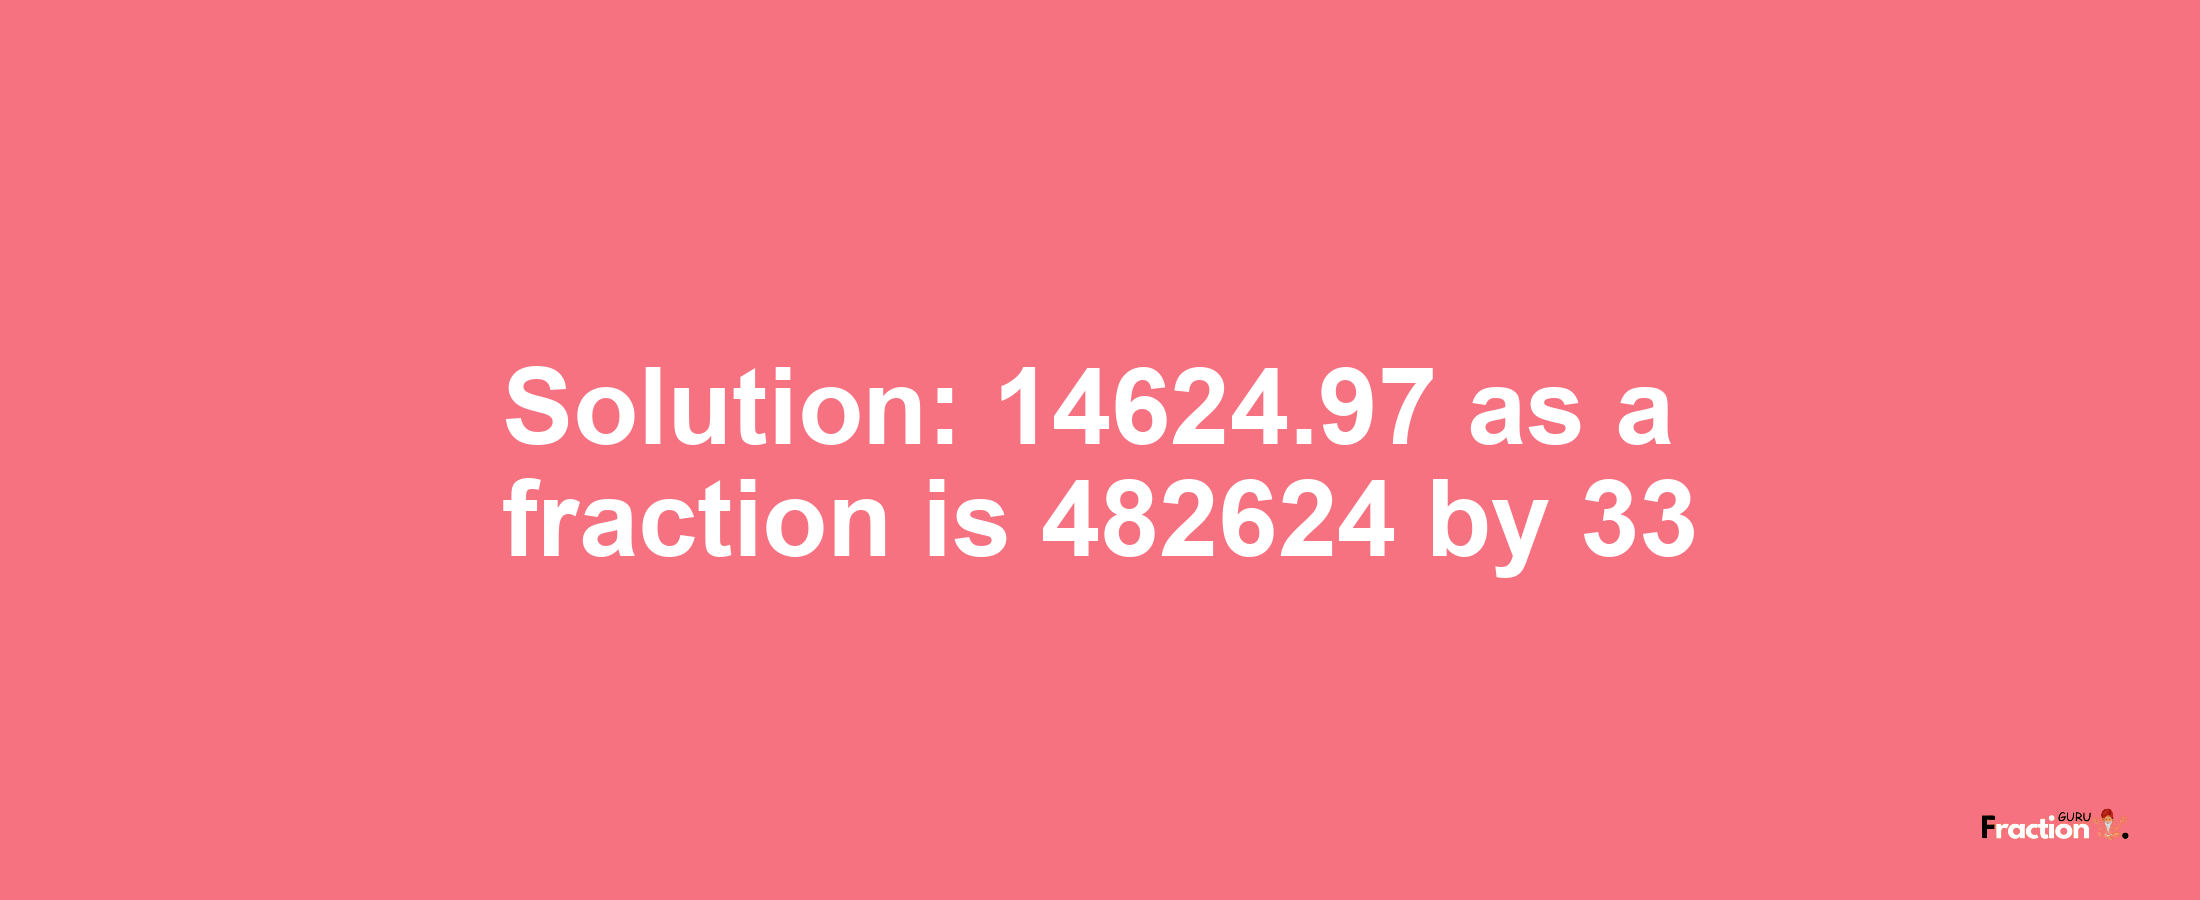 Solution:14624.97 as a fraction is 482624/33